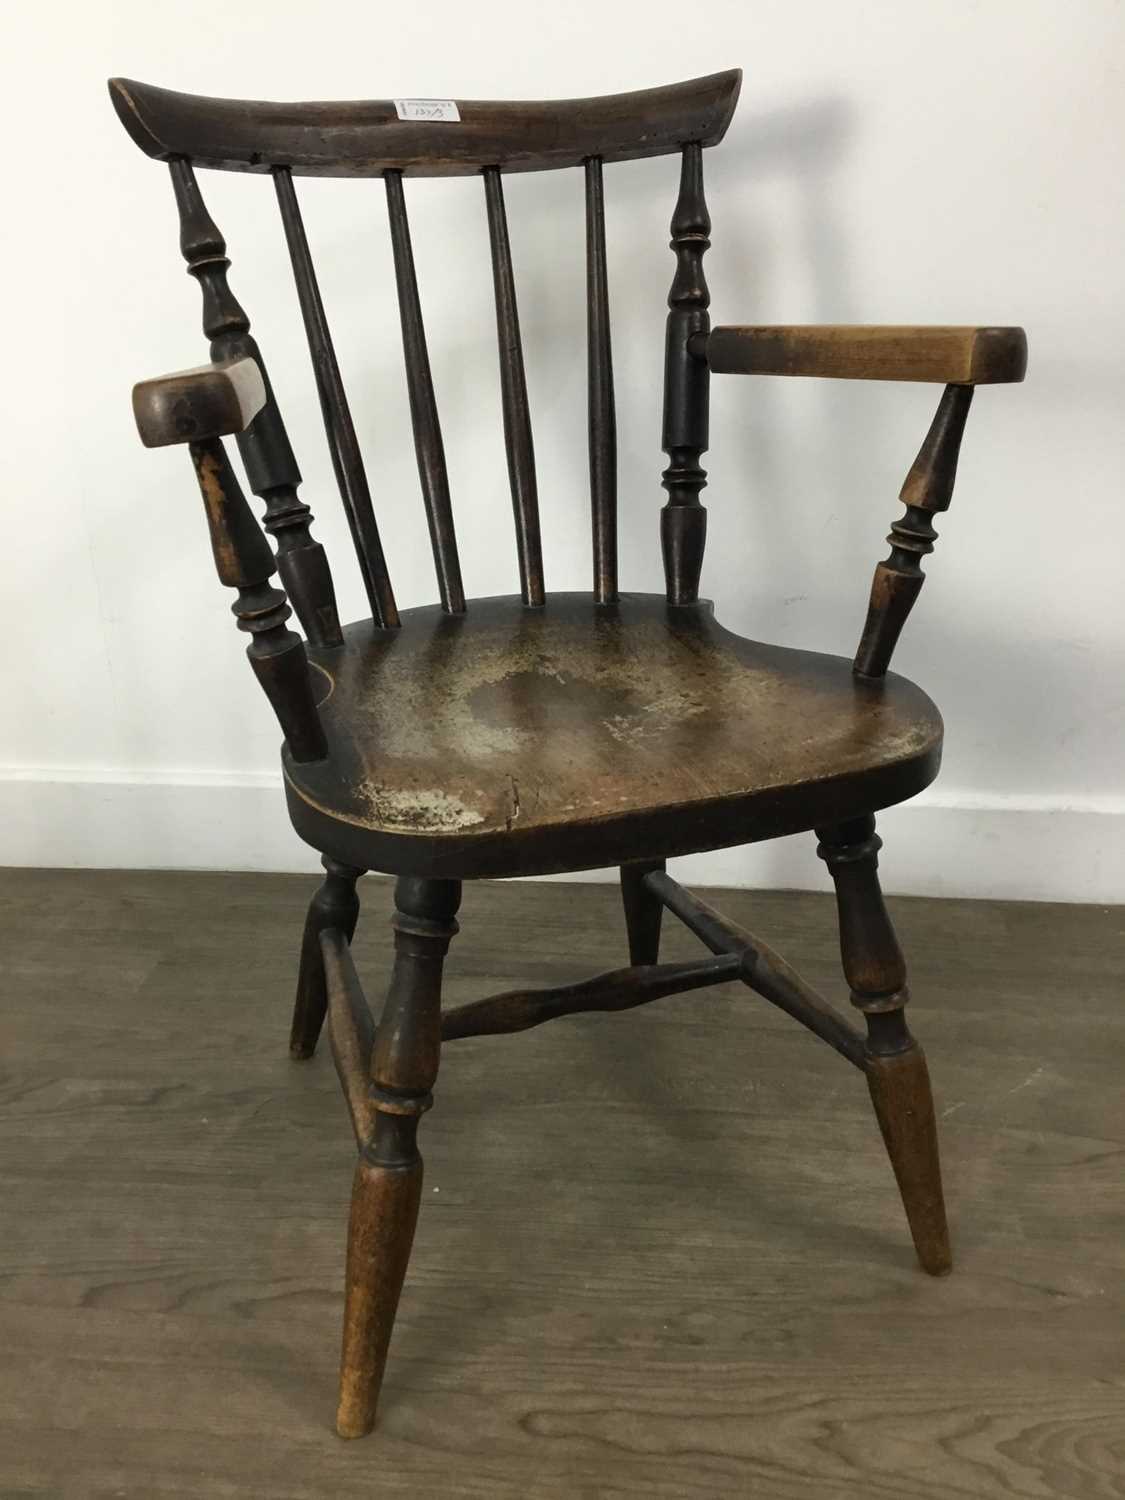 WINDSOR HOOP BACK CHAIR, ALONG WITH A CHILD'S CHAIR AND A FOOTSTOOL - Image 2 of 4